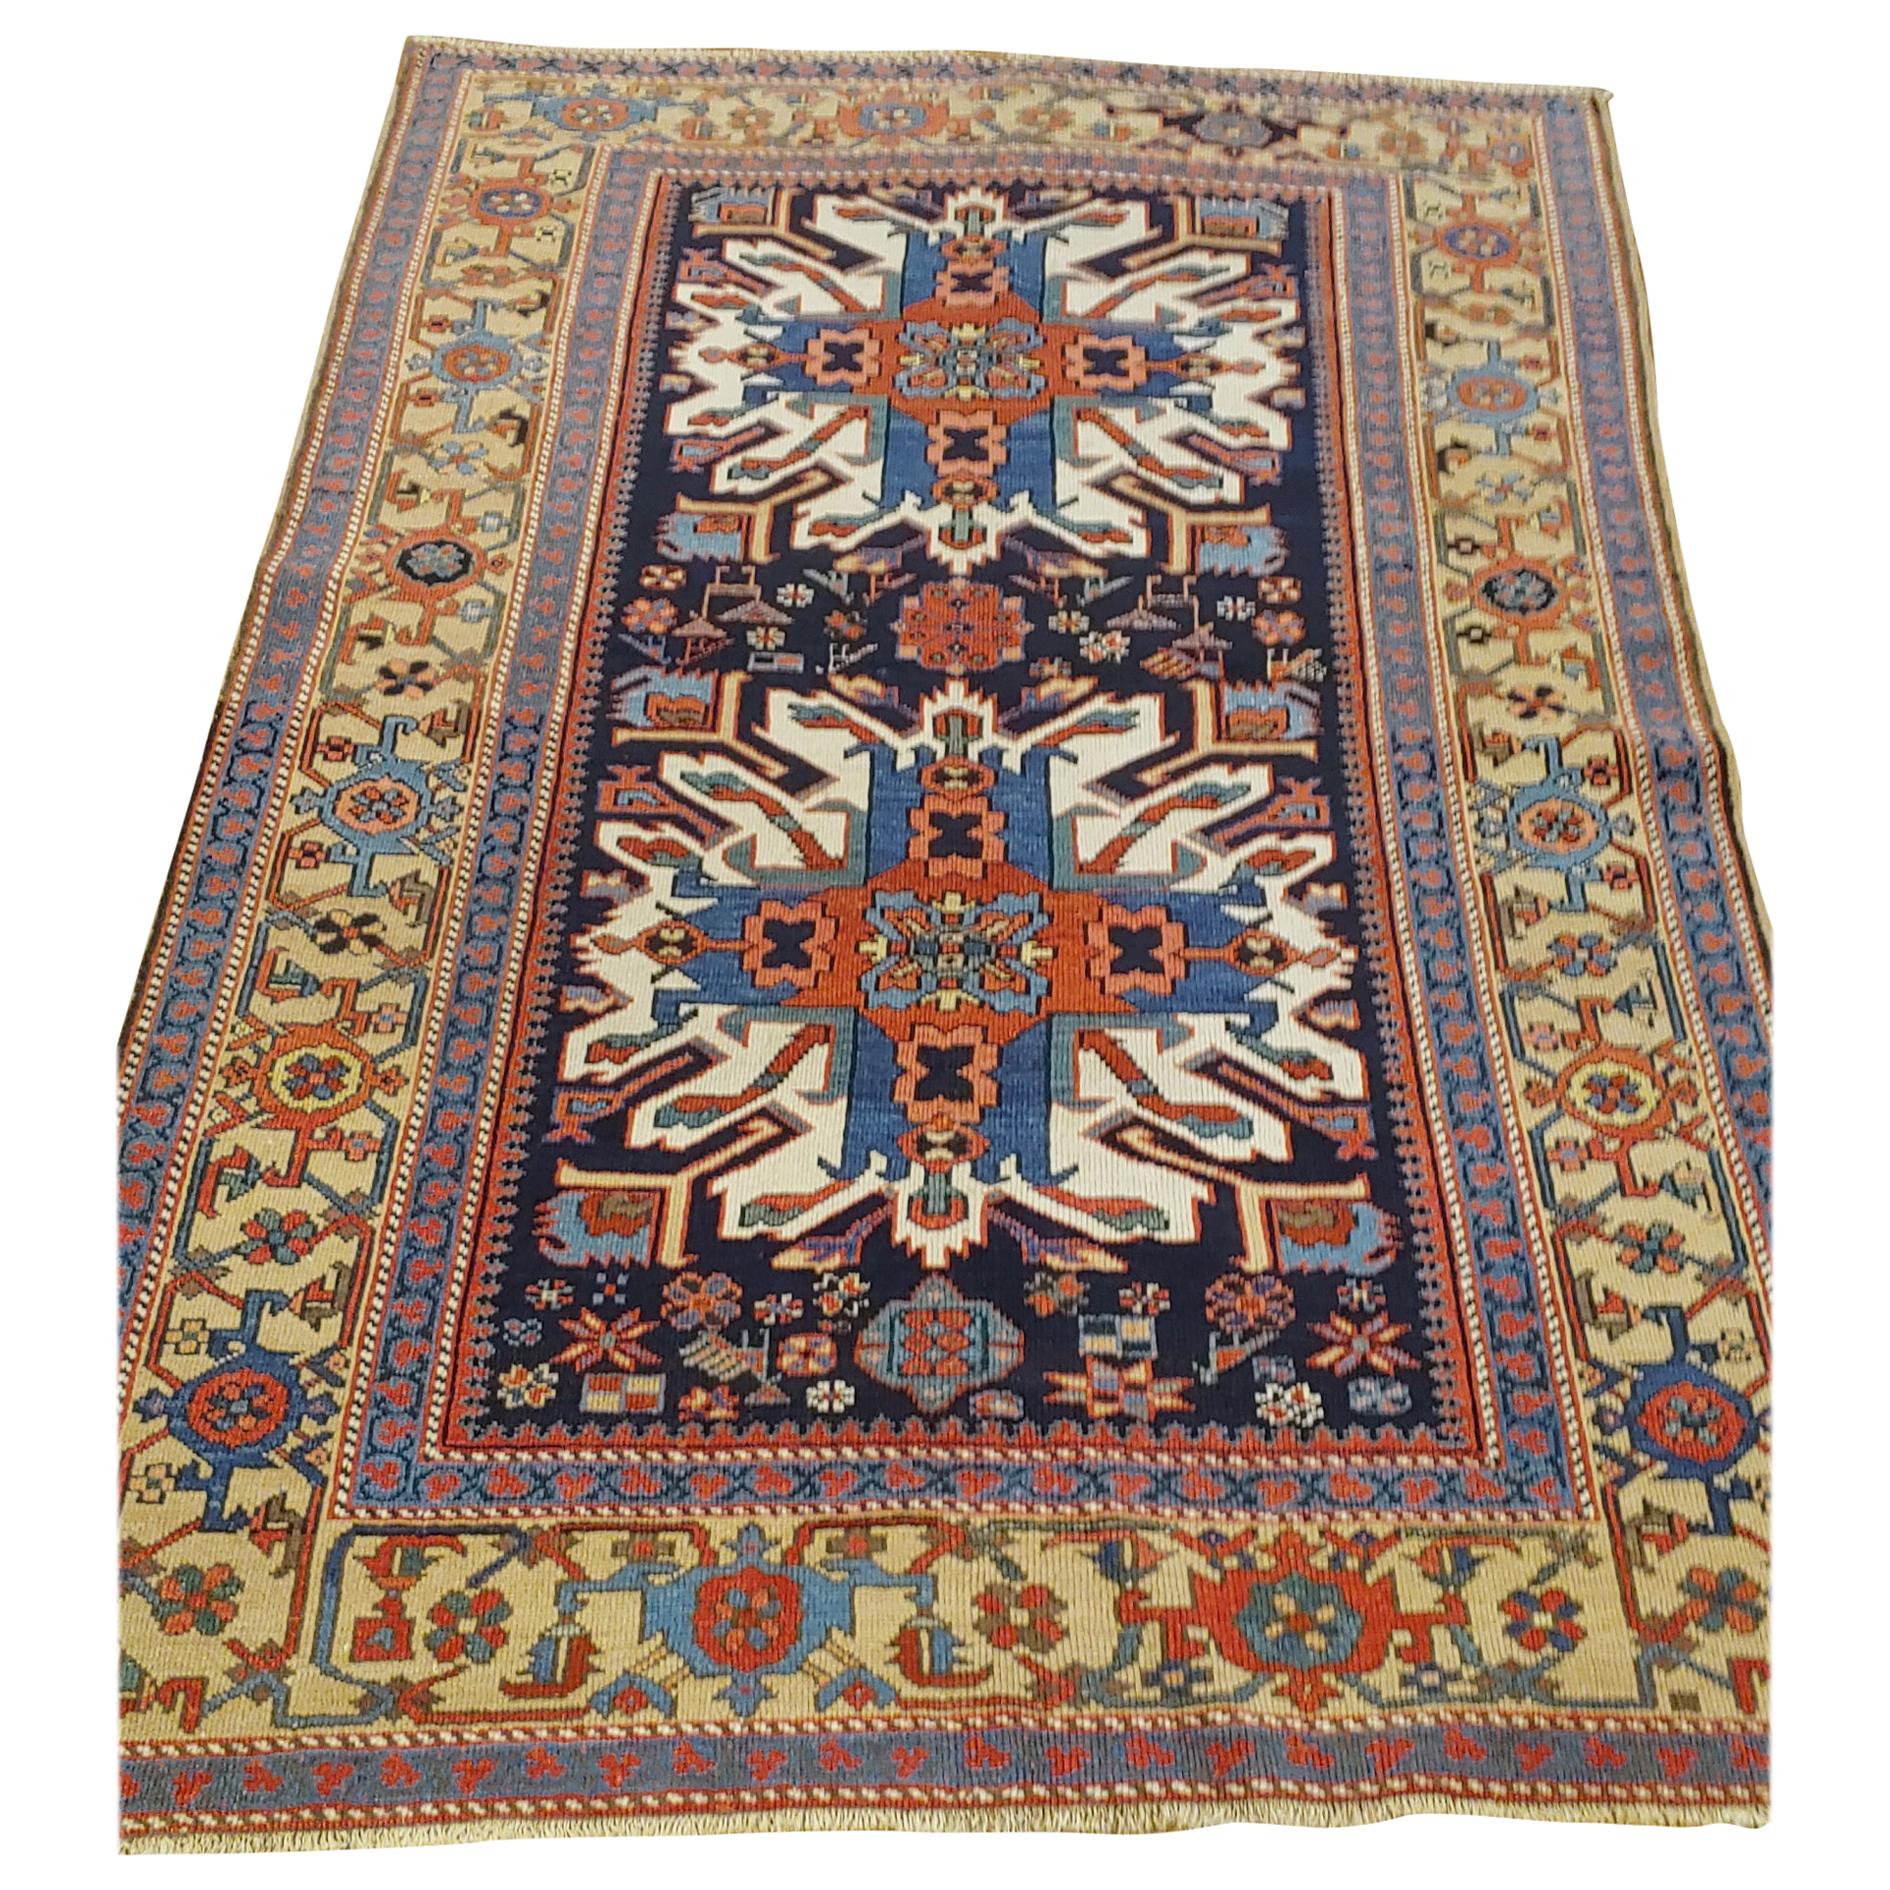 This beautiful navy blue Persian Karaja is dated 1910. Karaja is a village just outside Heriz and is sometimes called a Heriz. This piece has an unusual Eagle Kazak motif along with a surprising camel colored background border. It is 4-7 x 6-9. A